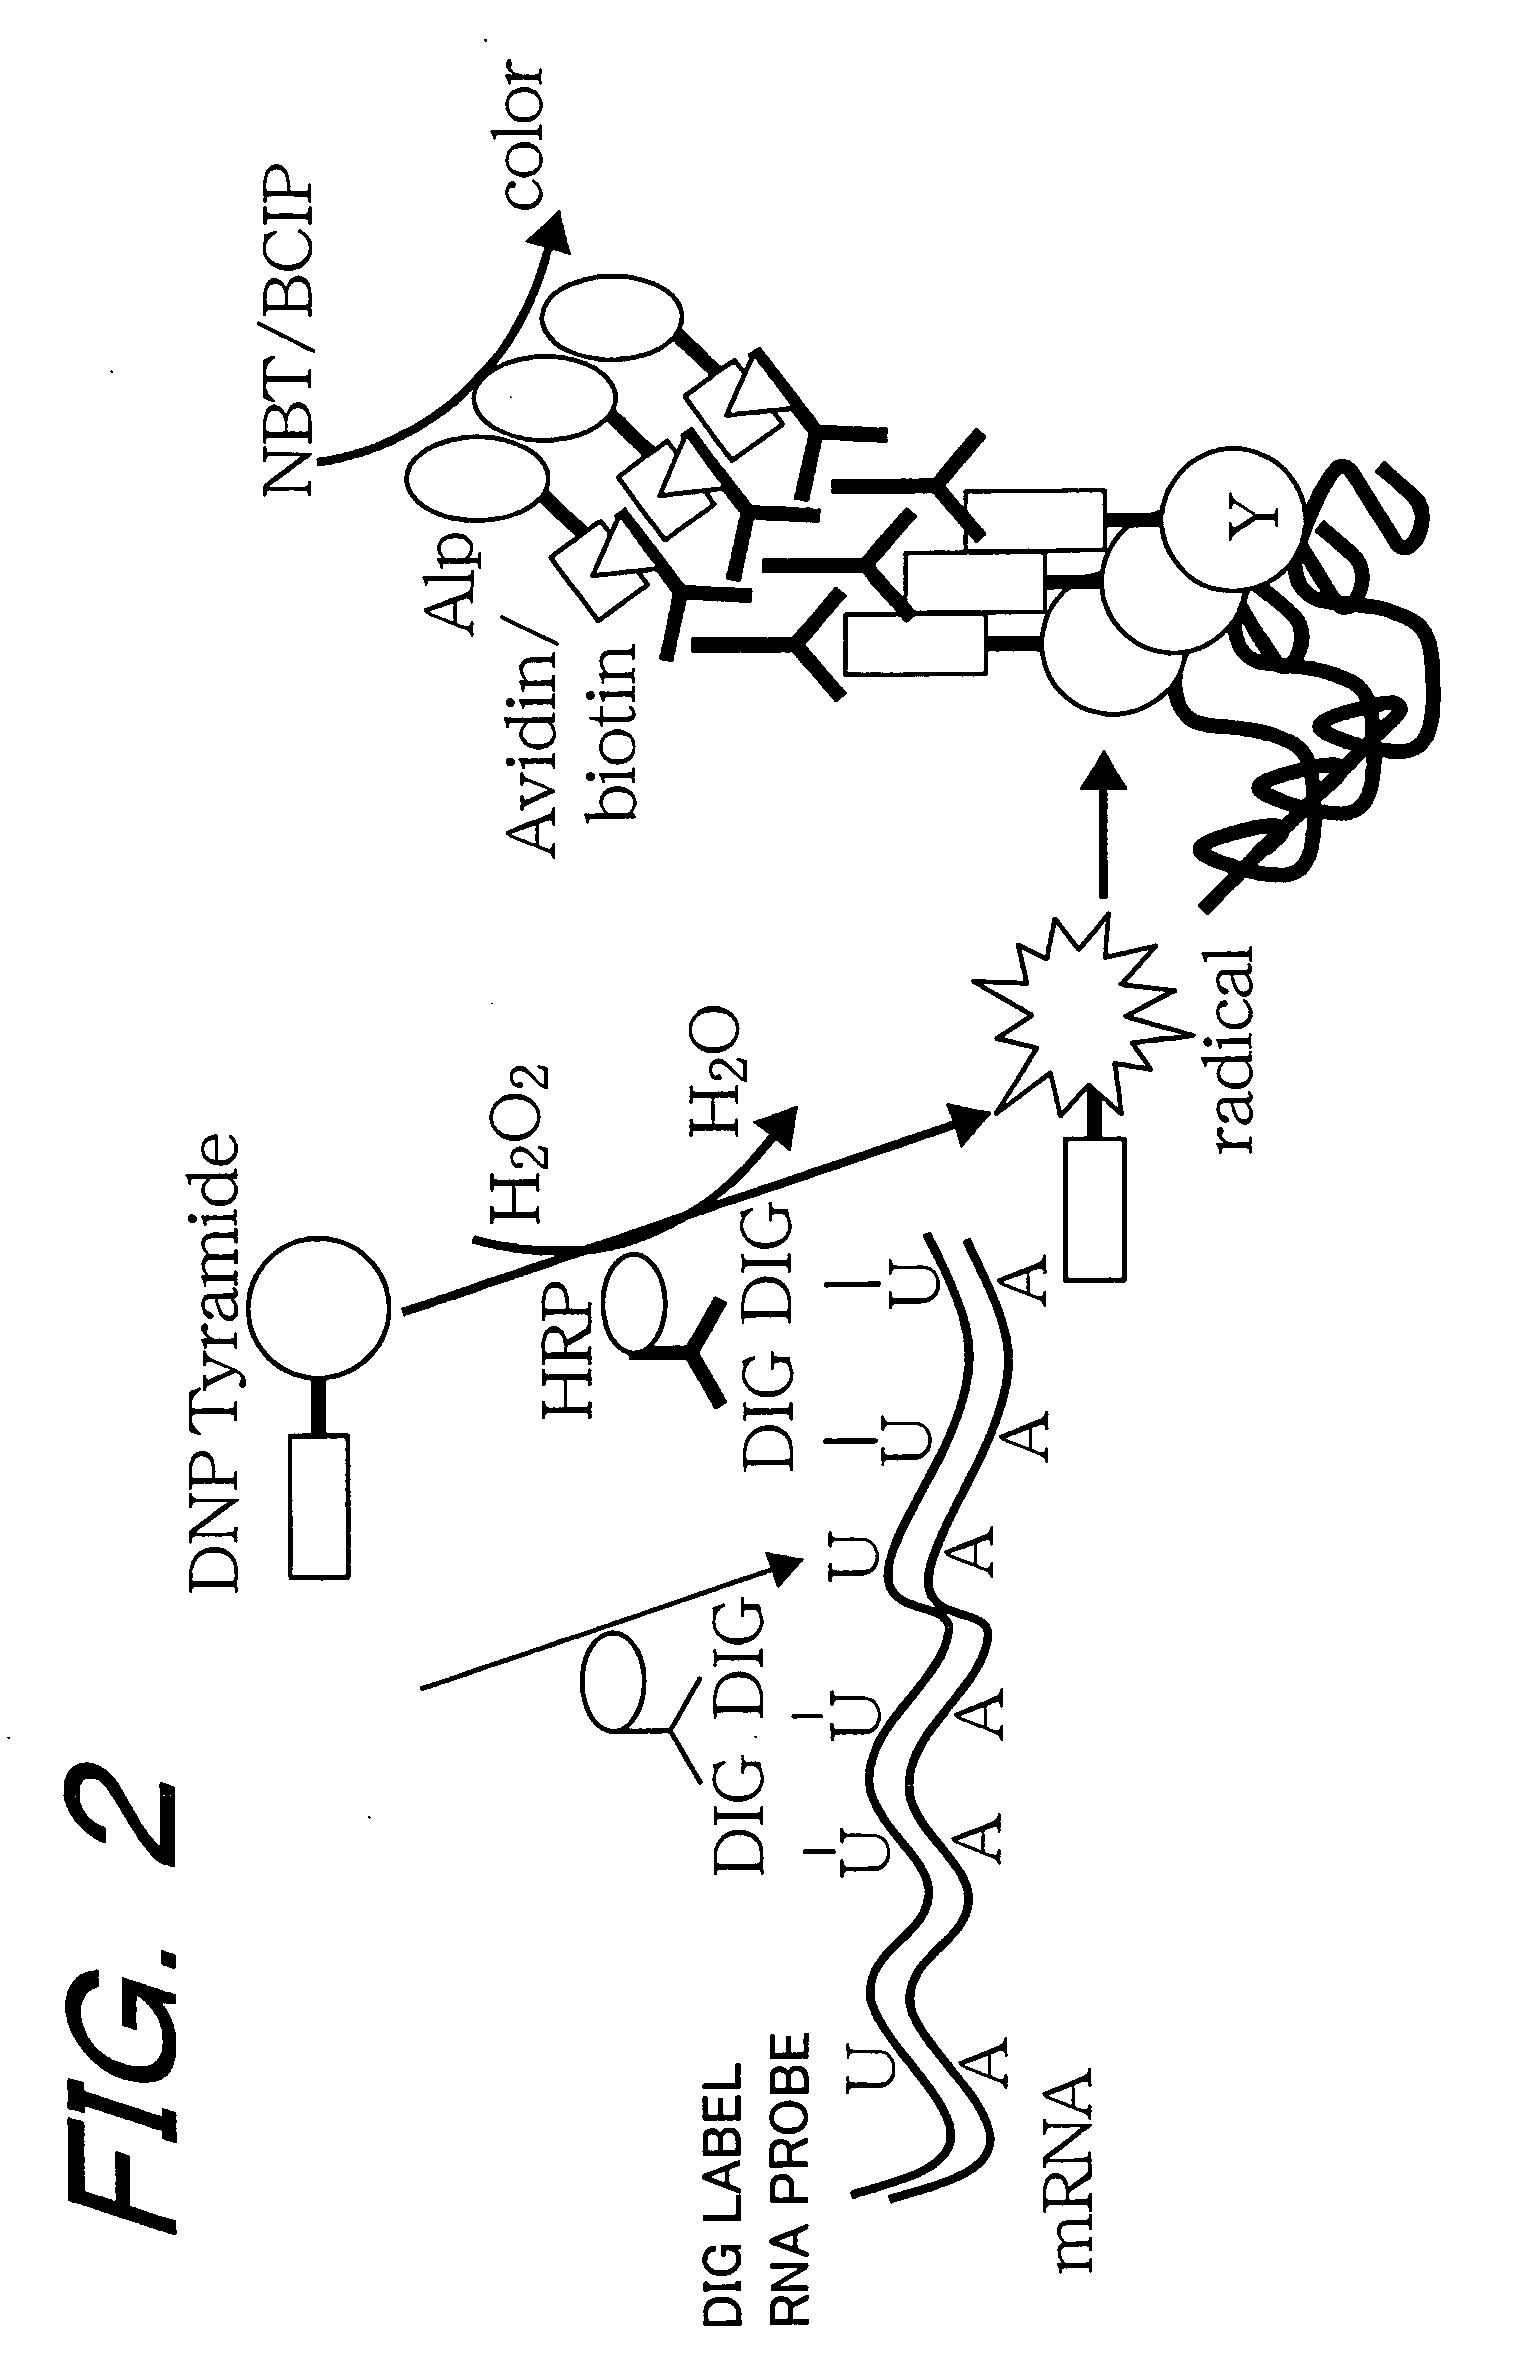 Method of Analyzing Biosample by Laser Ablation and Apparatus Therefor